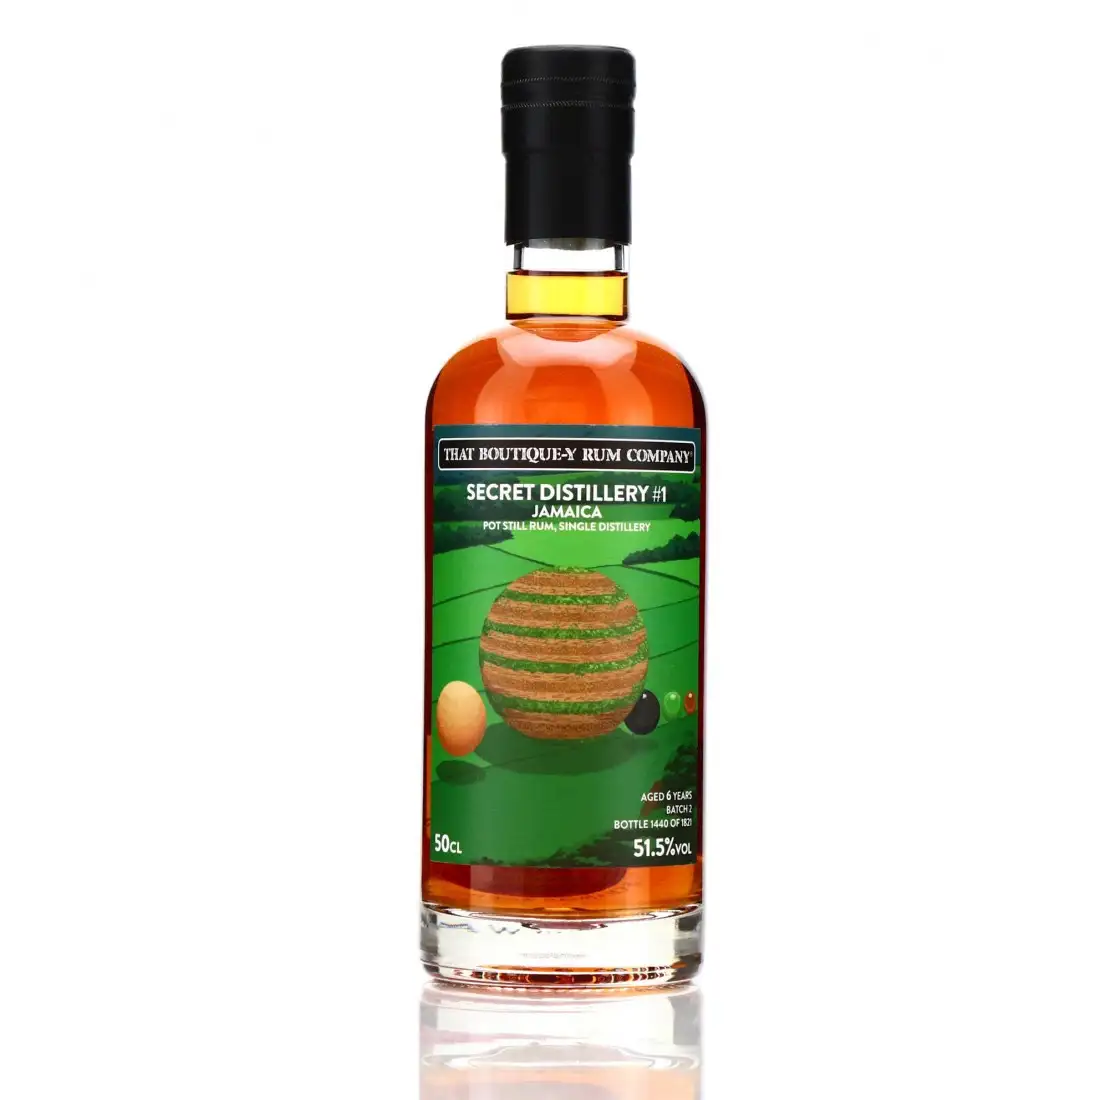 Image of the front of the bottle of the rum Secret Distillery #1